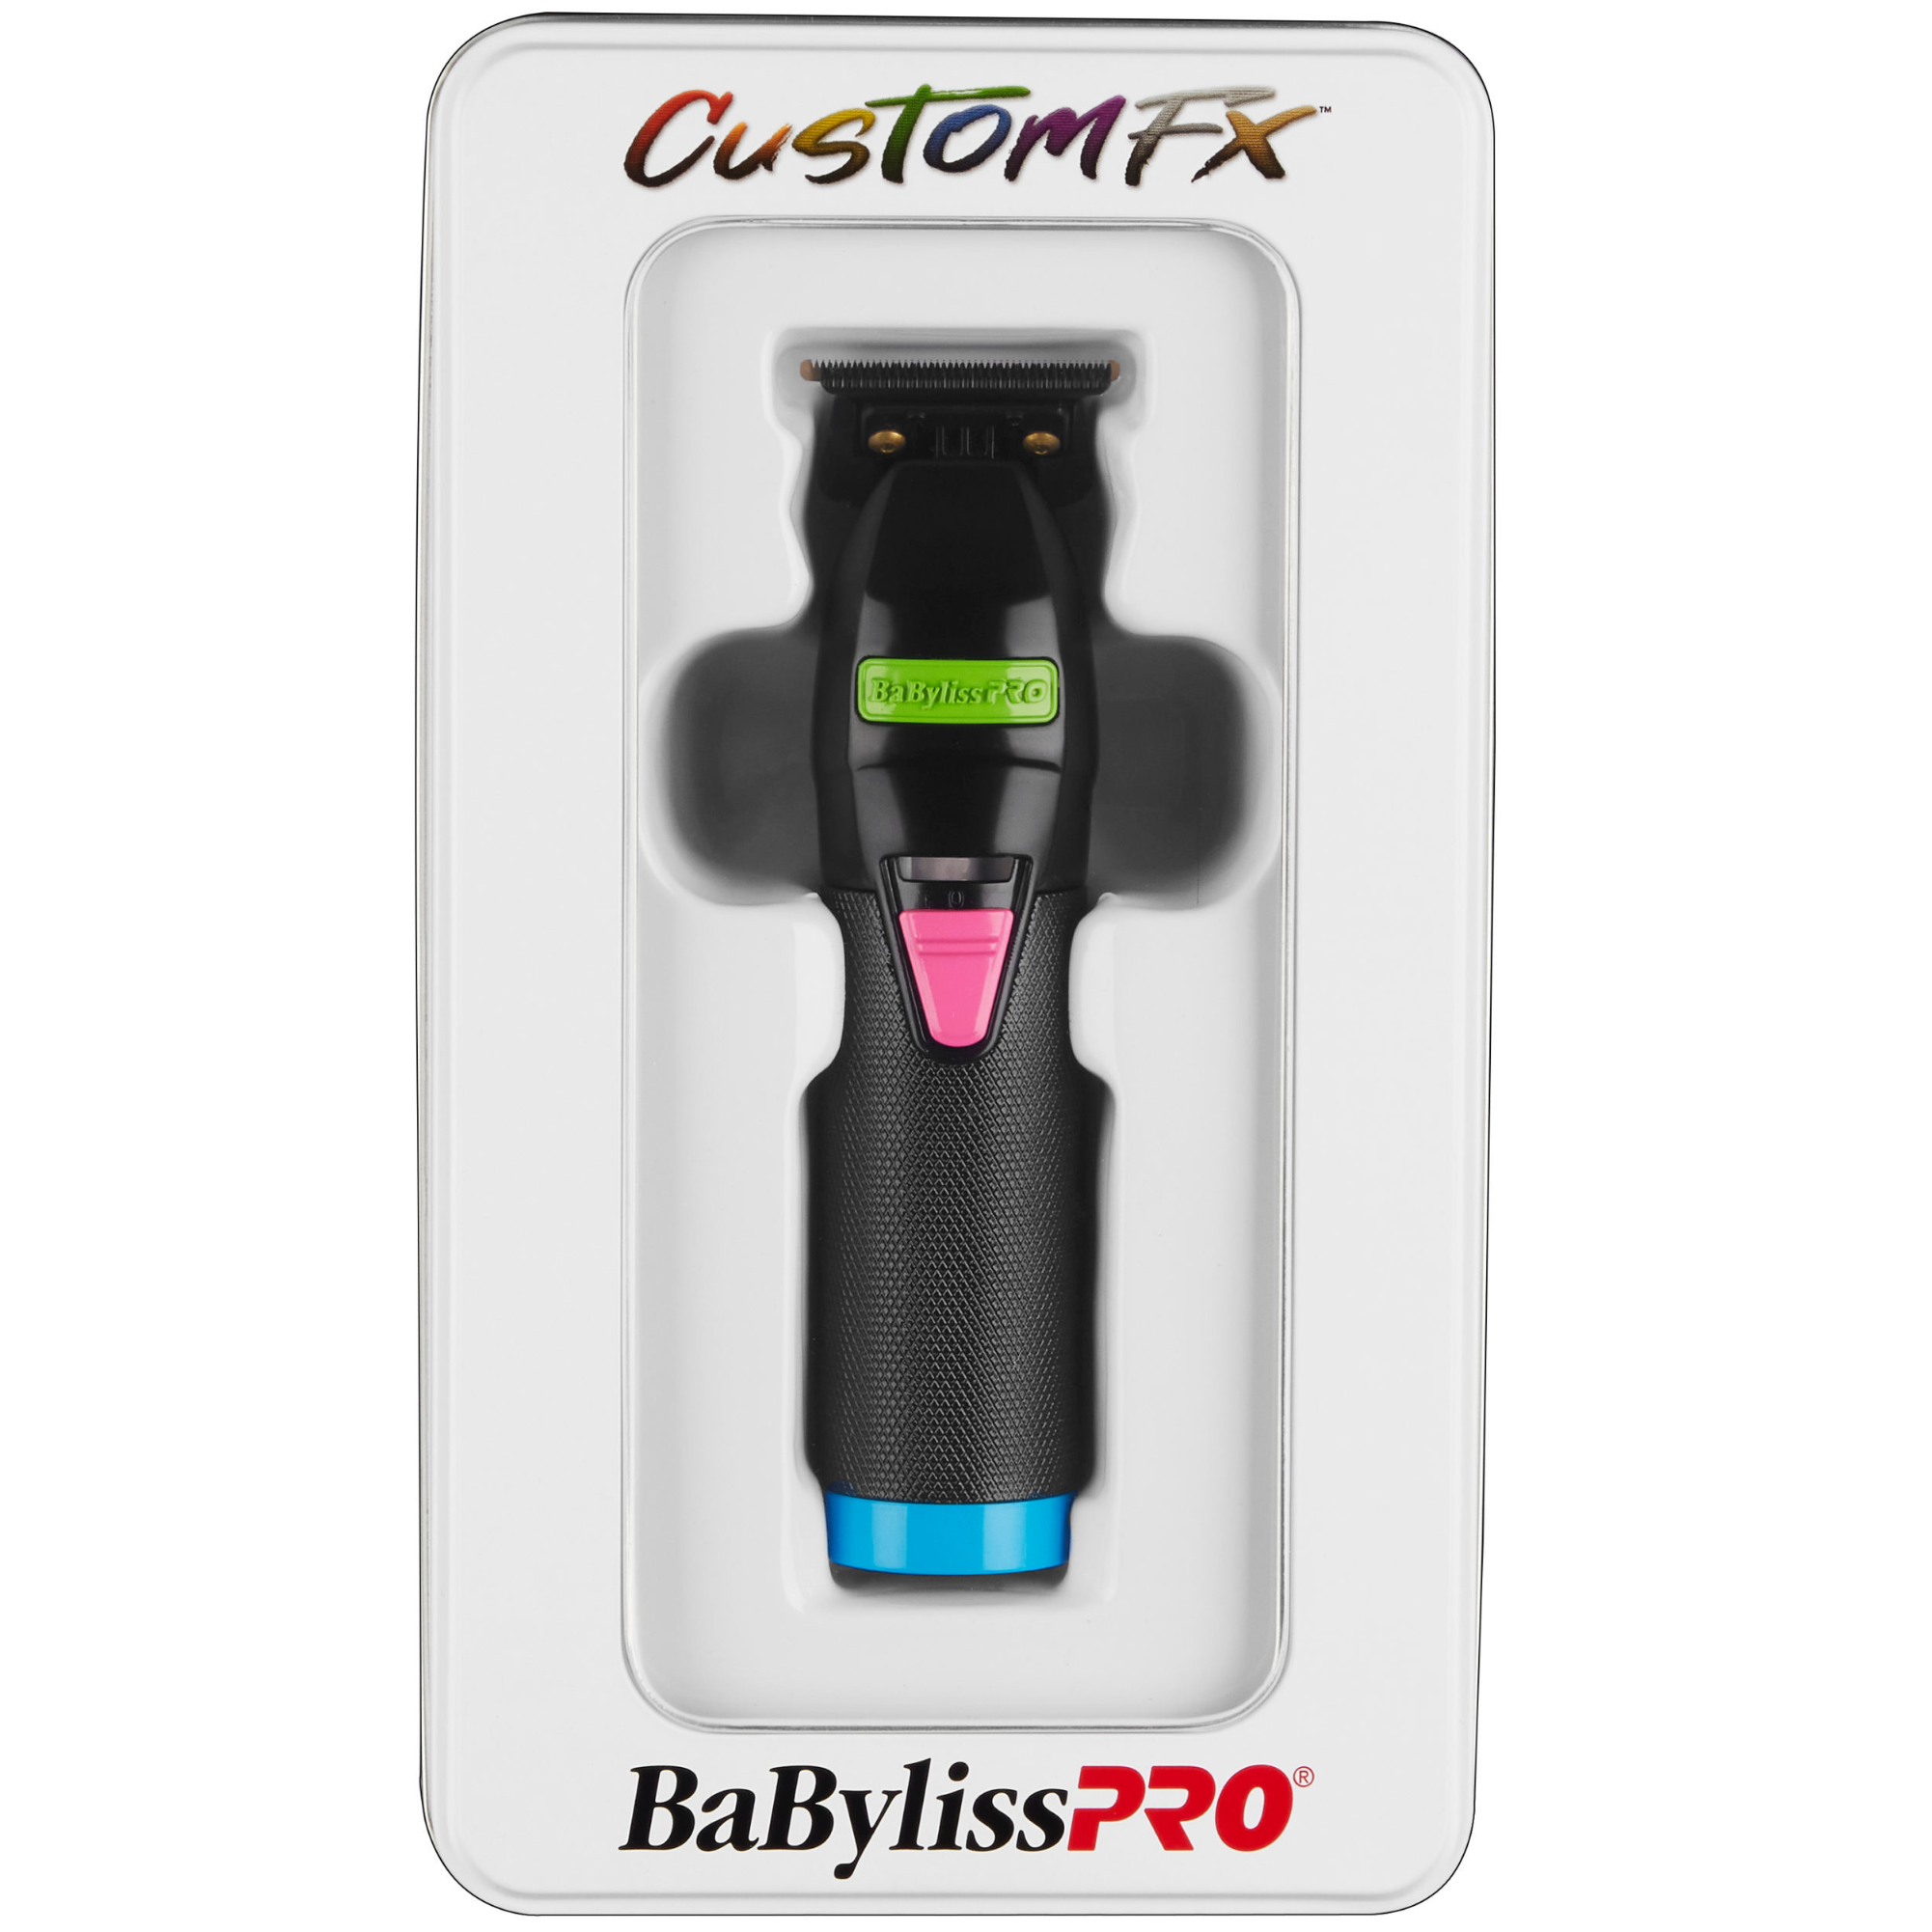 Black Hair Trimmer with Green, Pink and Blue features in Box | BaBylissPRO CustomFX